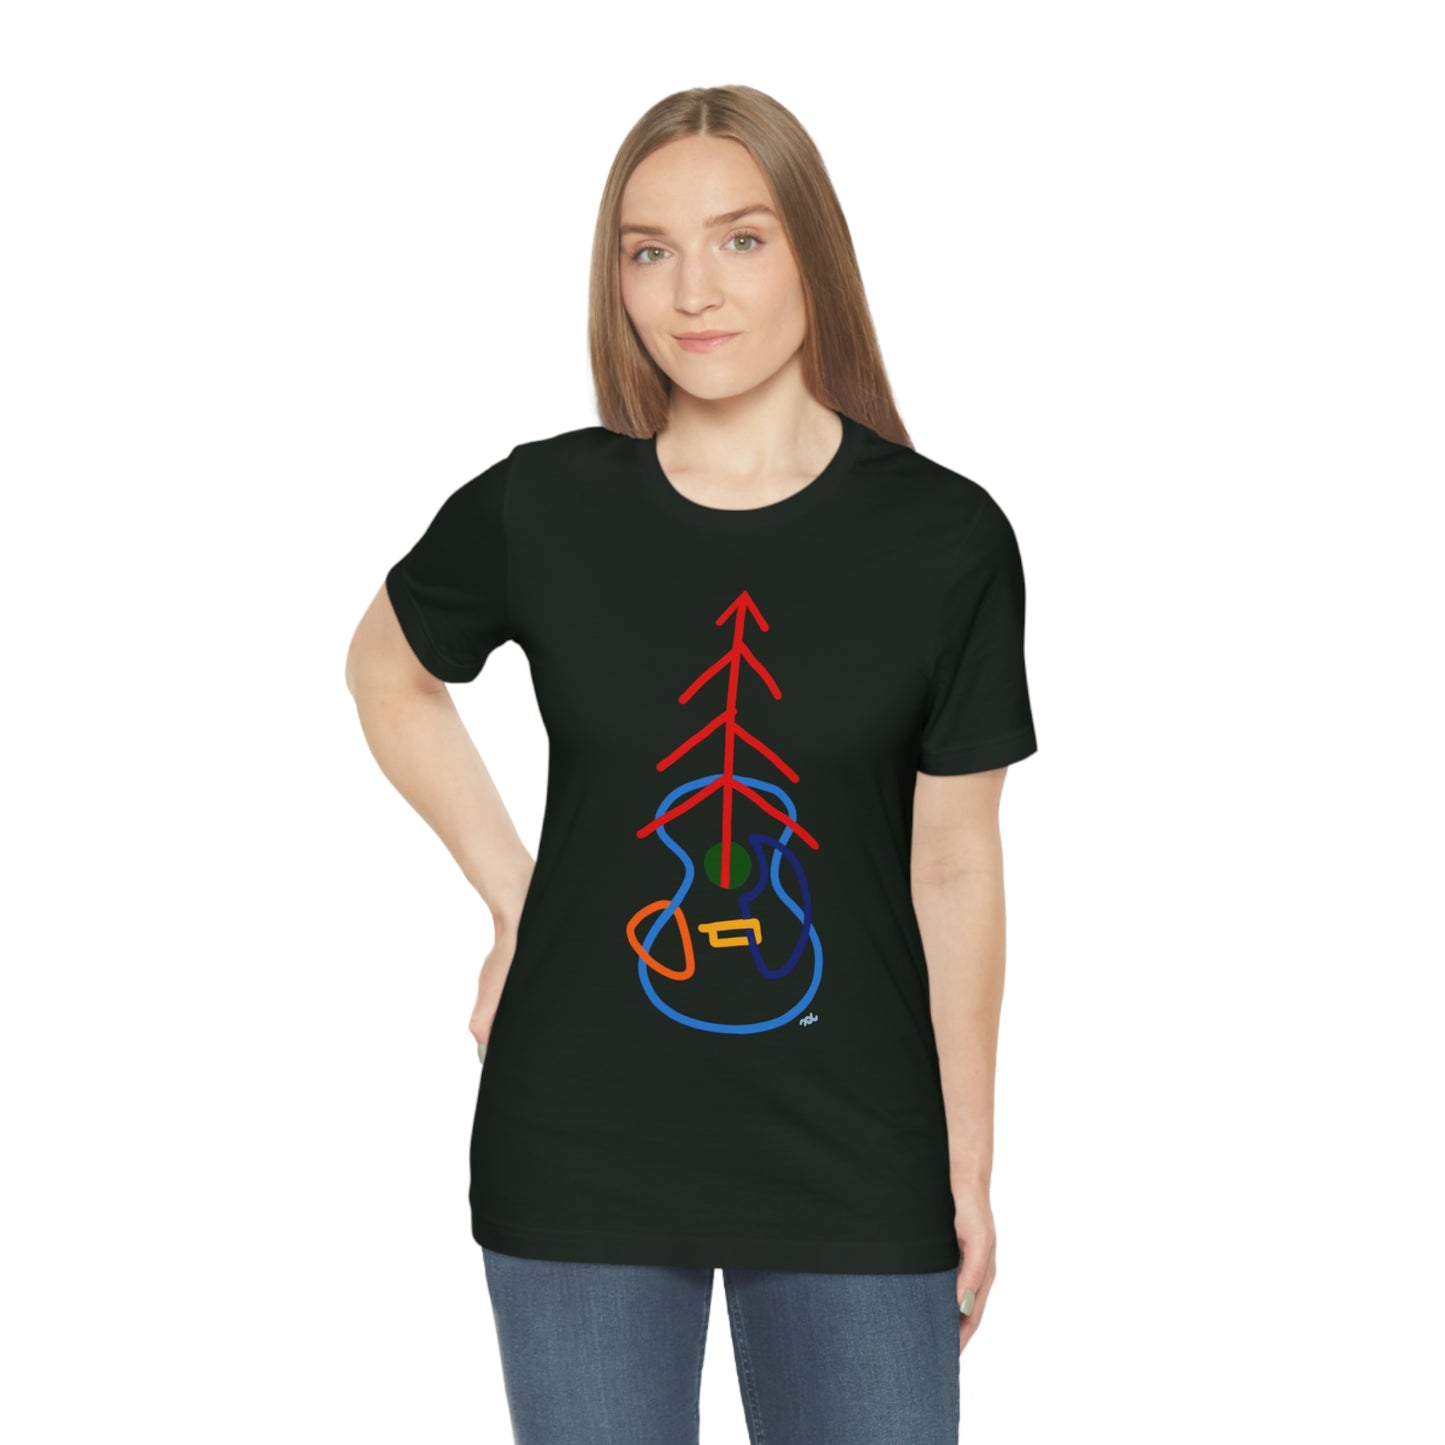 Lines Of Sound Short Sleeve Shirt